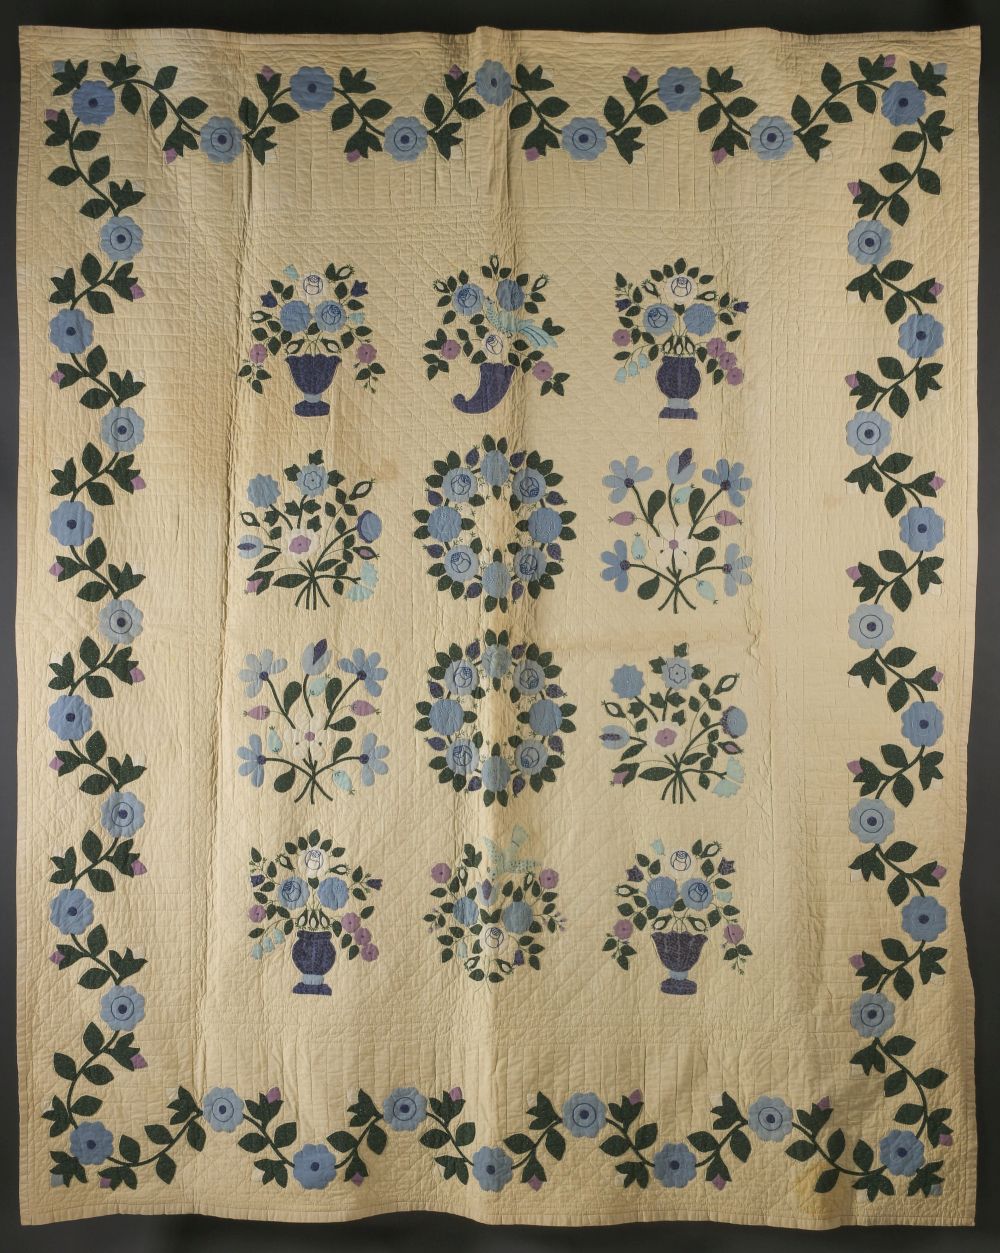 AN ELABORATE APPLIQUE' QUILT OF FLORAL SPRAYS AND VASES